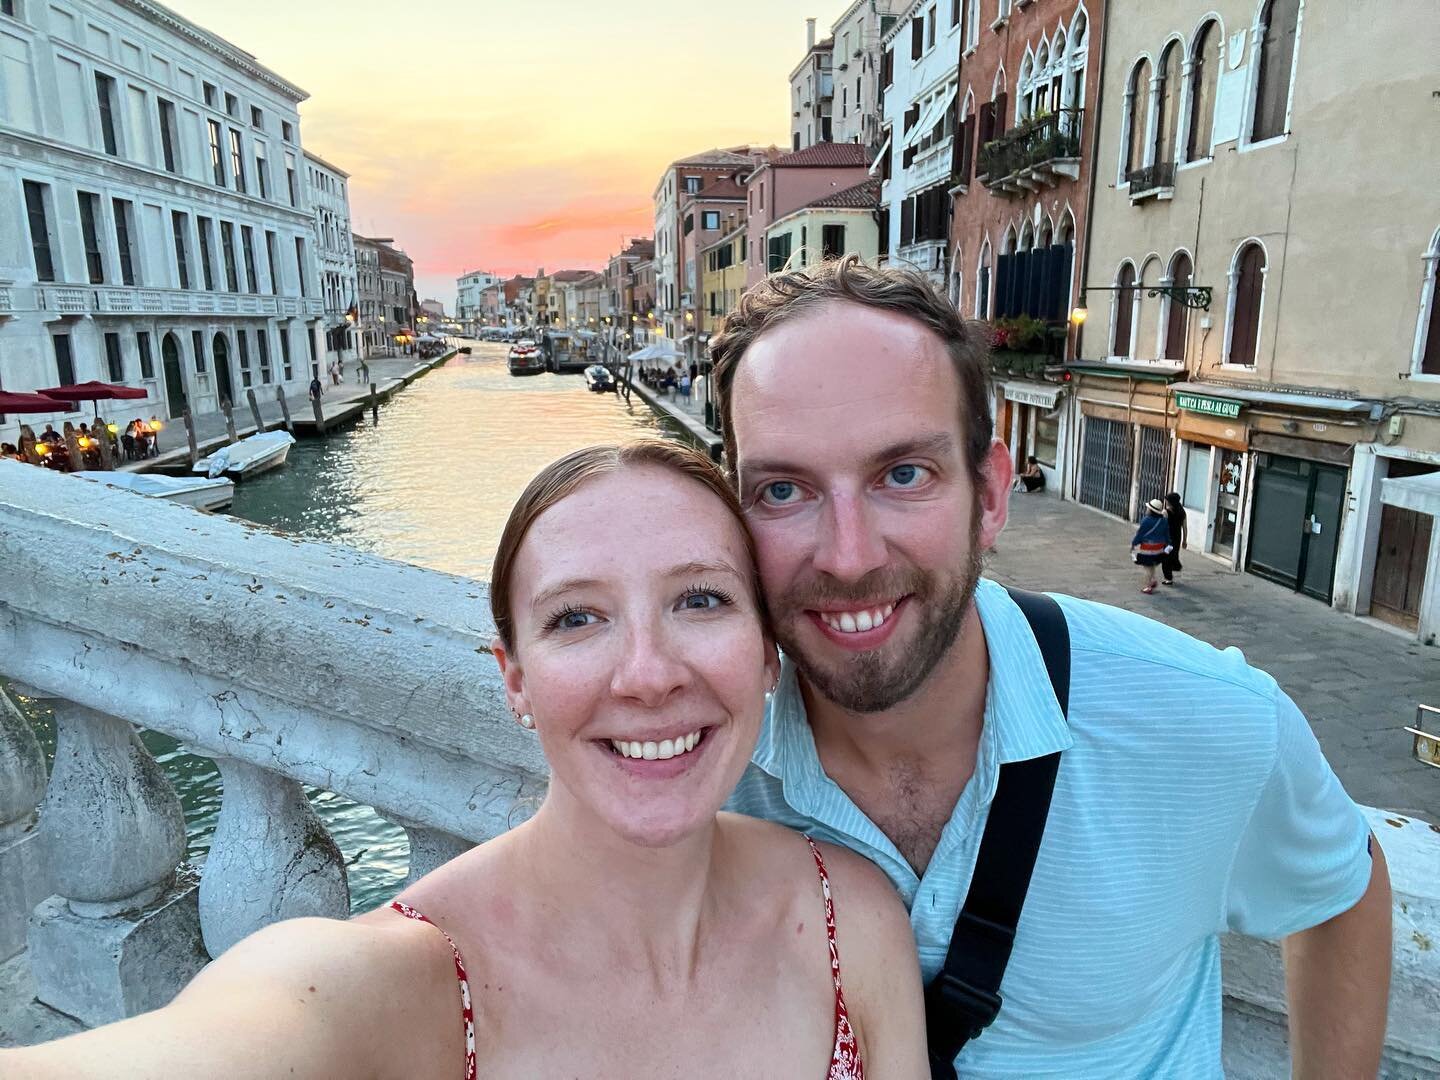 Back to our regularly scheduled content (me in Italy, but this time with Caleb)